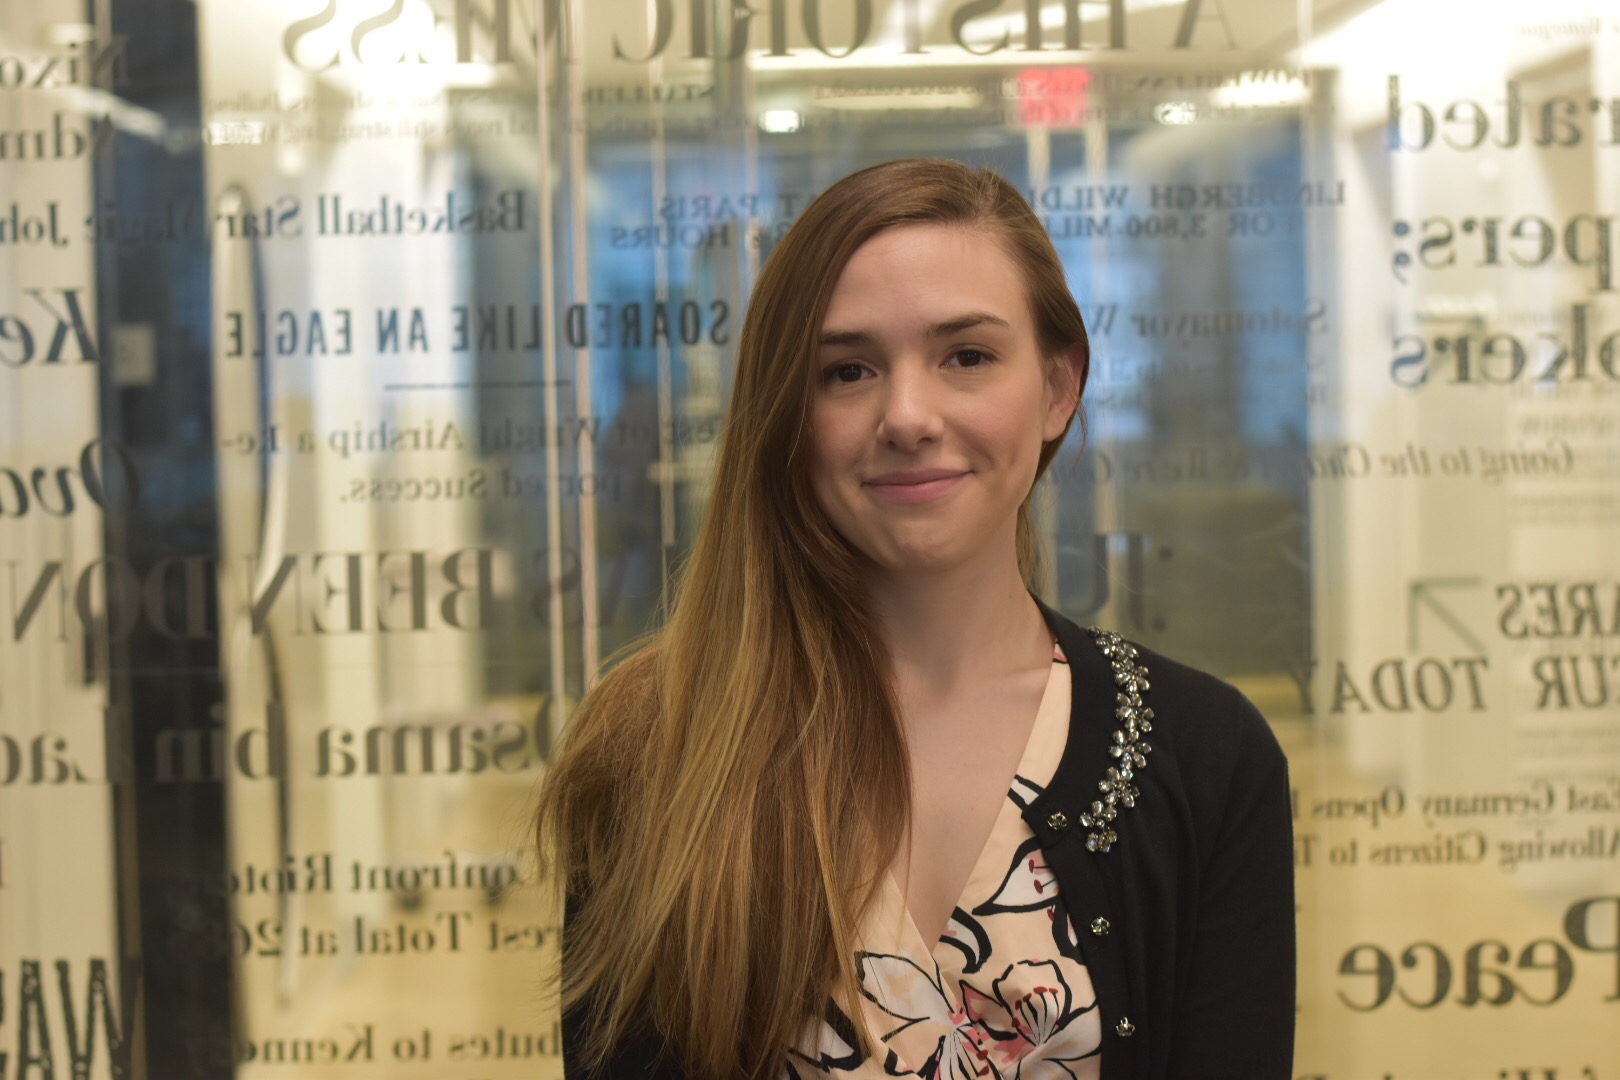 Elizabeth Bruenig, an assistant editor at The Washington Post, says the demands and intensity of a job in journalism will play into her decision whether to have another child in the future